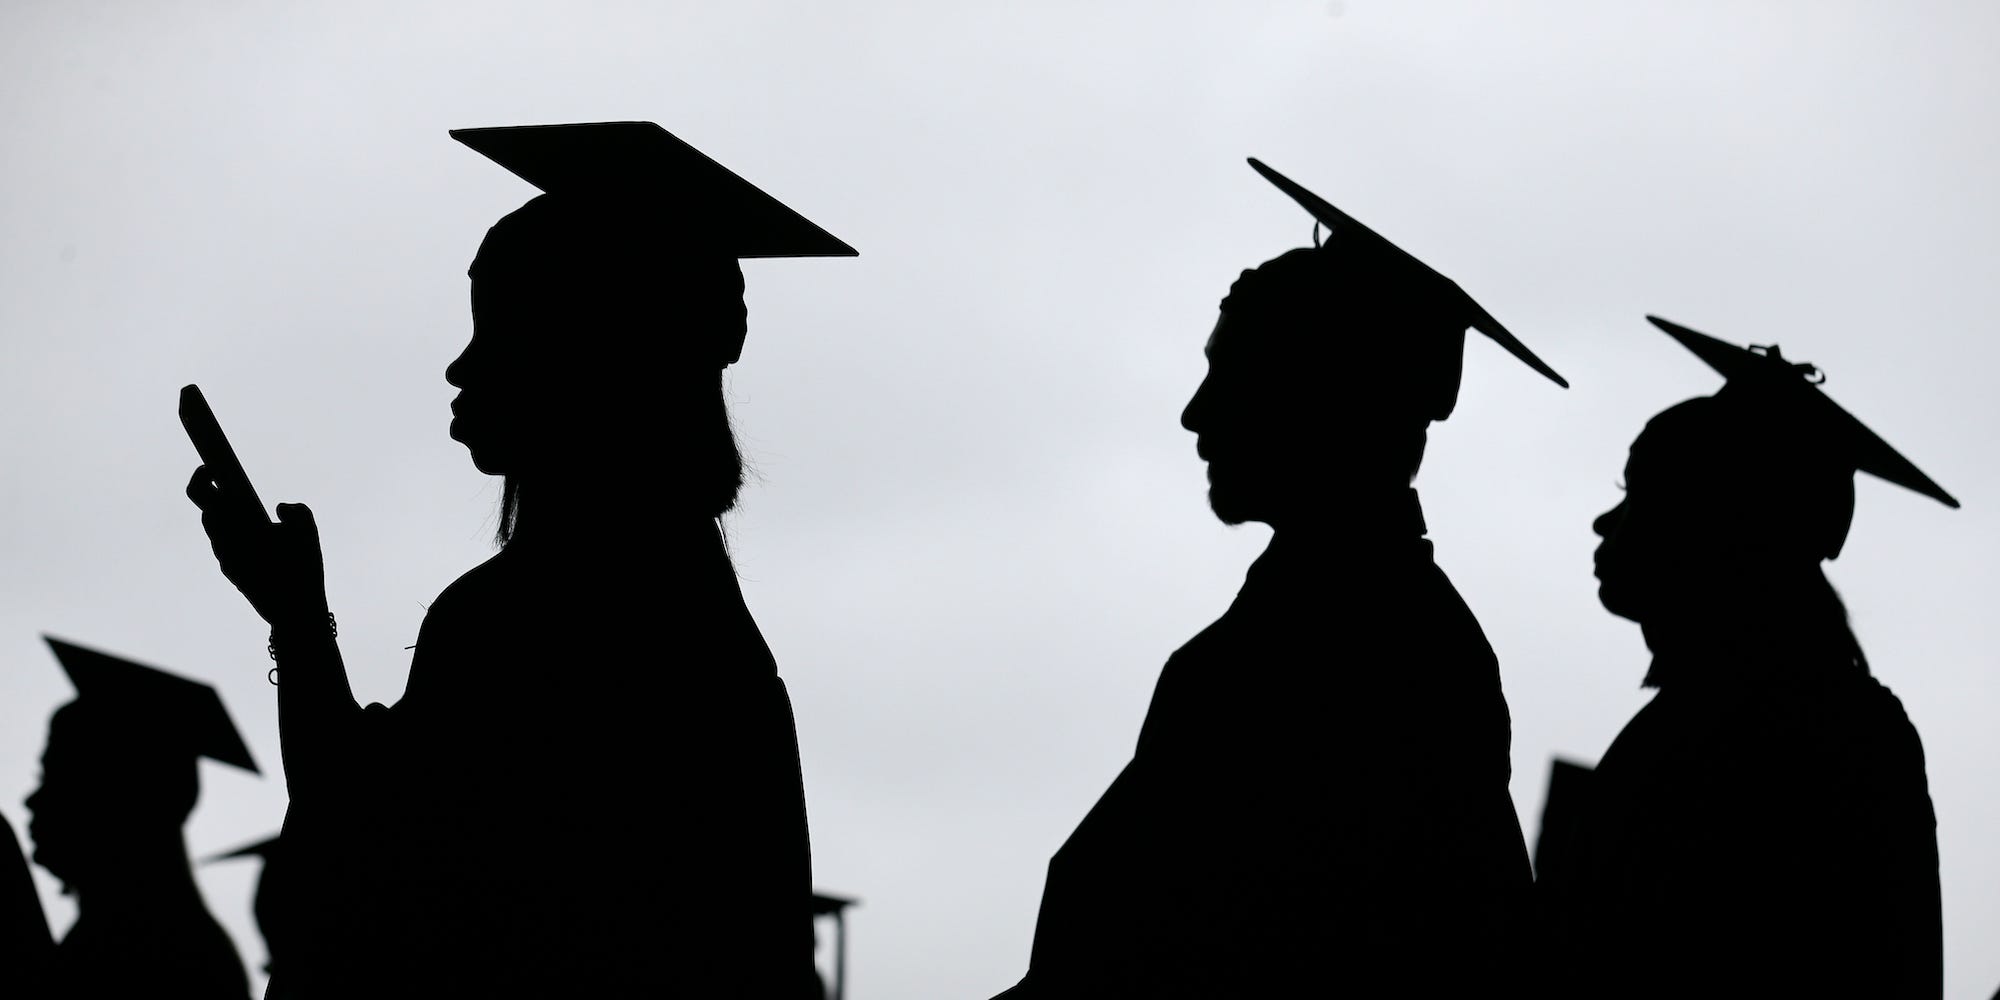 In this May 17, 2018, file photo, new graduates line up before the start of the Bergen Community College commencement at MetLife Stadium in East Rutherford, N.J. There’s no single policy or action that will alleviate America’s $1.74 trillion student loan debt crisis while simultaneously preventing students from taking on unaffordable amounts of future debt. Higher education financing experts are divided on the exact combination of solutions, but all agree it will require a multipronged approach.